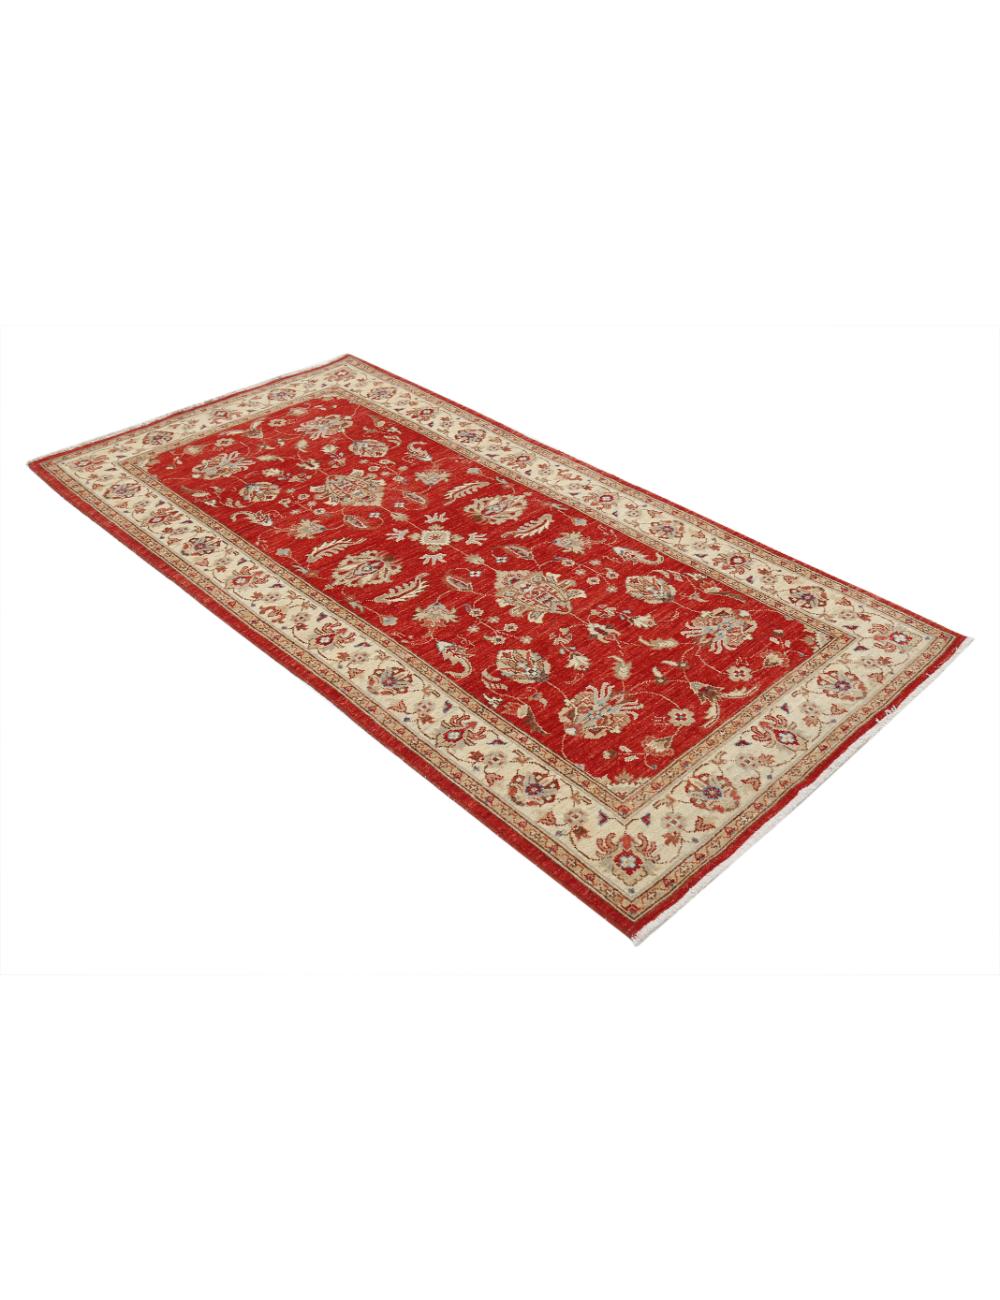 Ziegler 3' 5" X 6' 6" Hand-Knotted Wool Rug 3' 5" X 6' 6" (104 X 198) / Red / Ivory